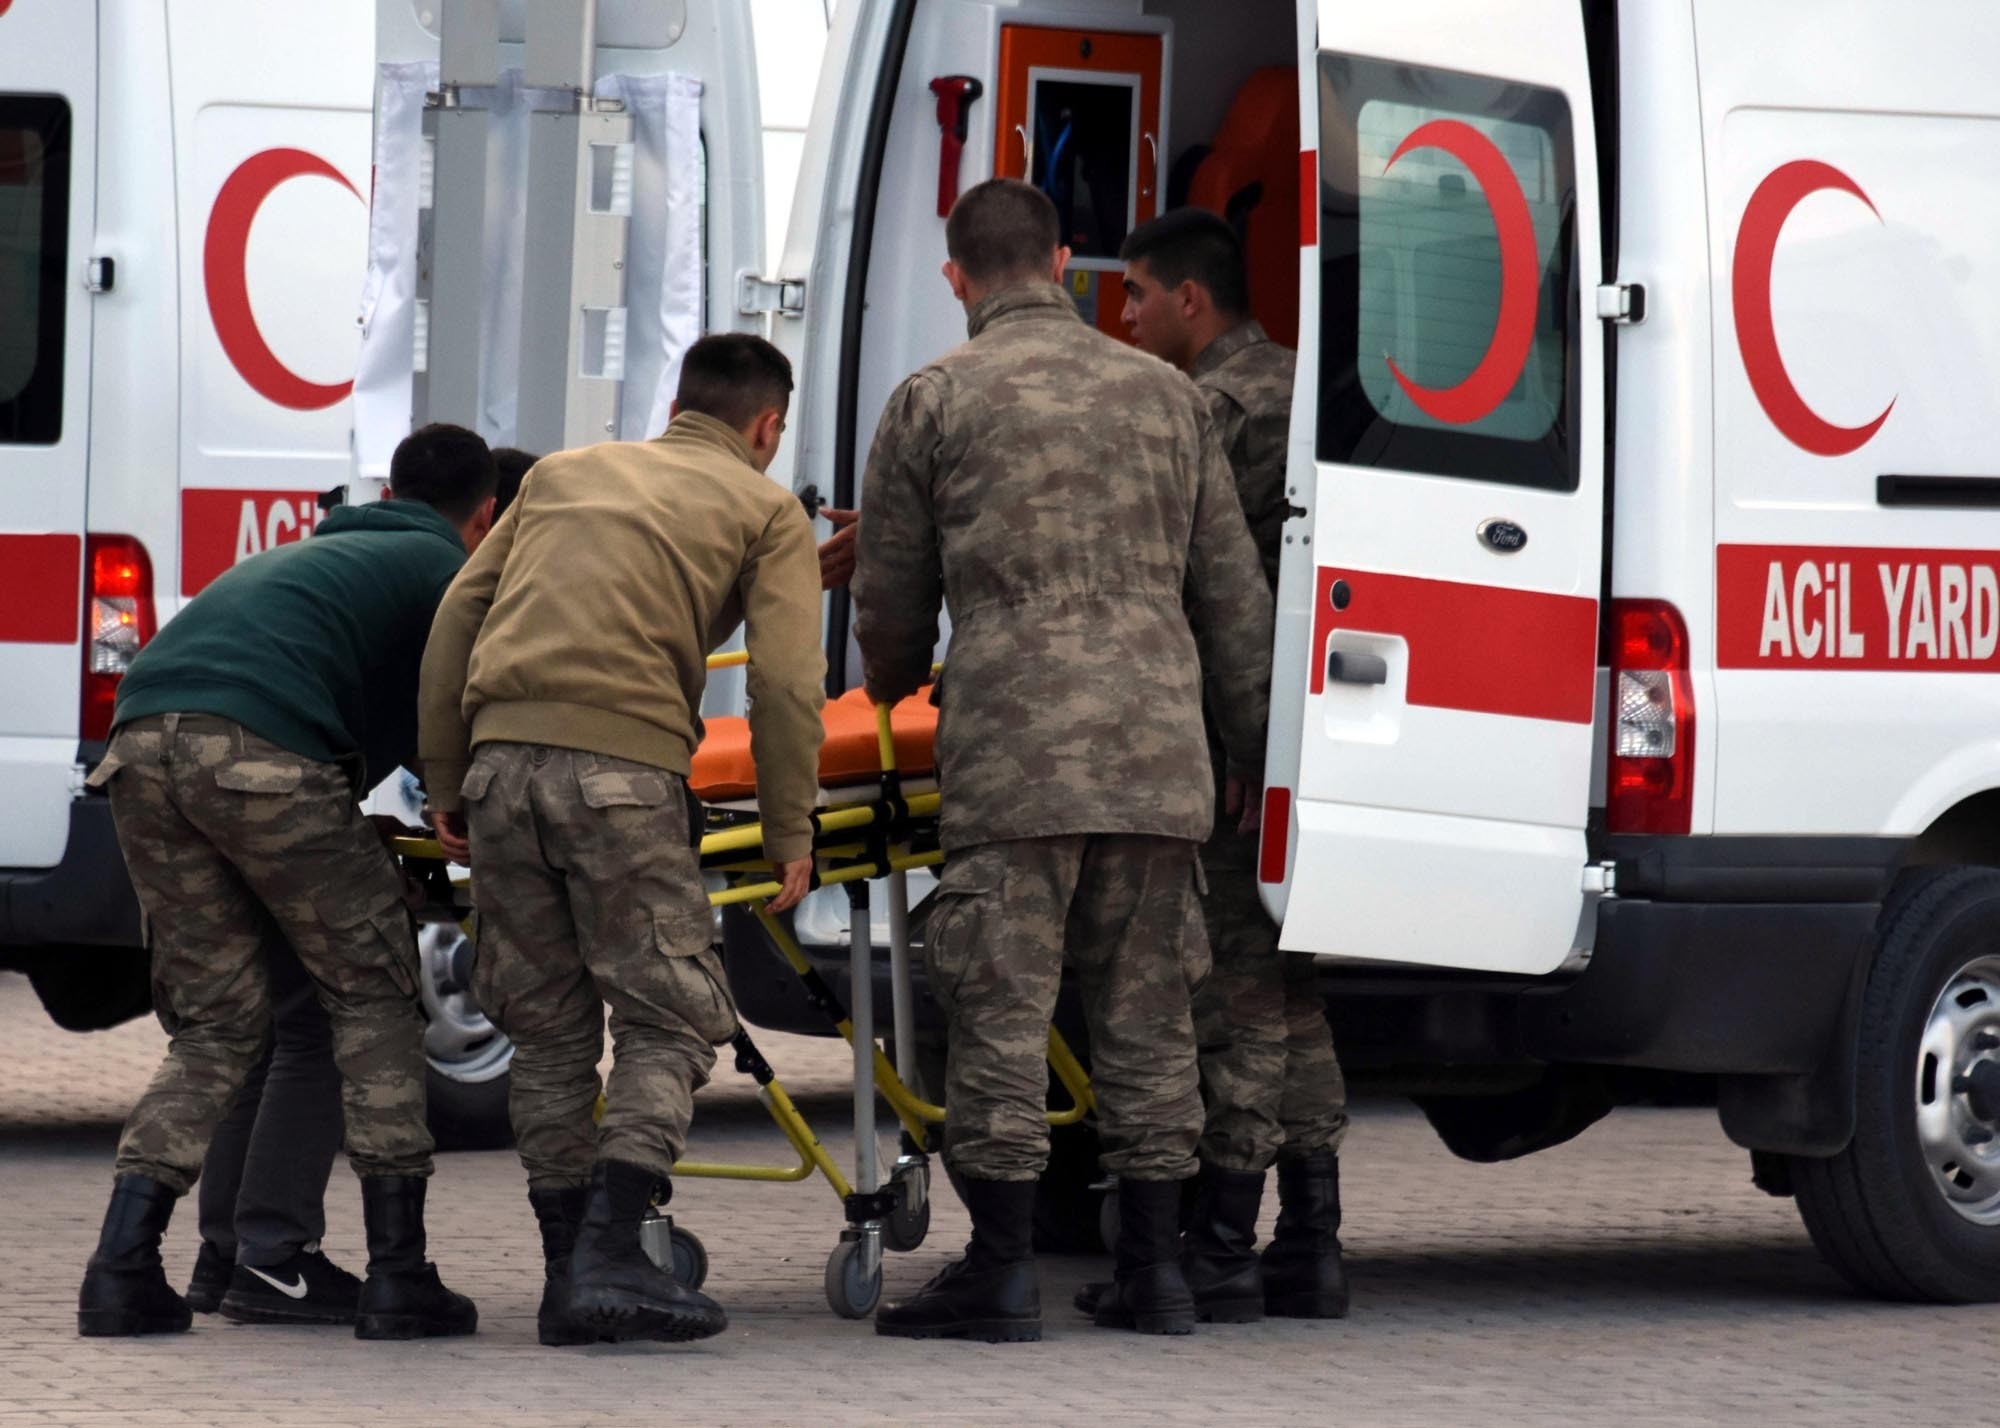 Soldiers wounded in the PKK terror attack are being transferred to the hospital in Van, May 24, 2016 (DHA Photo)